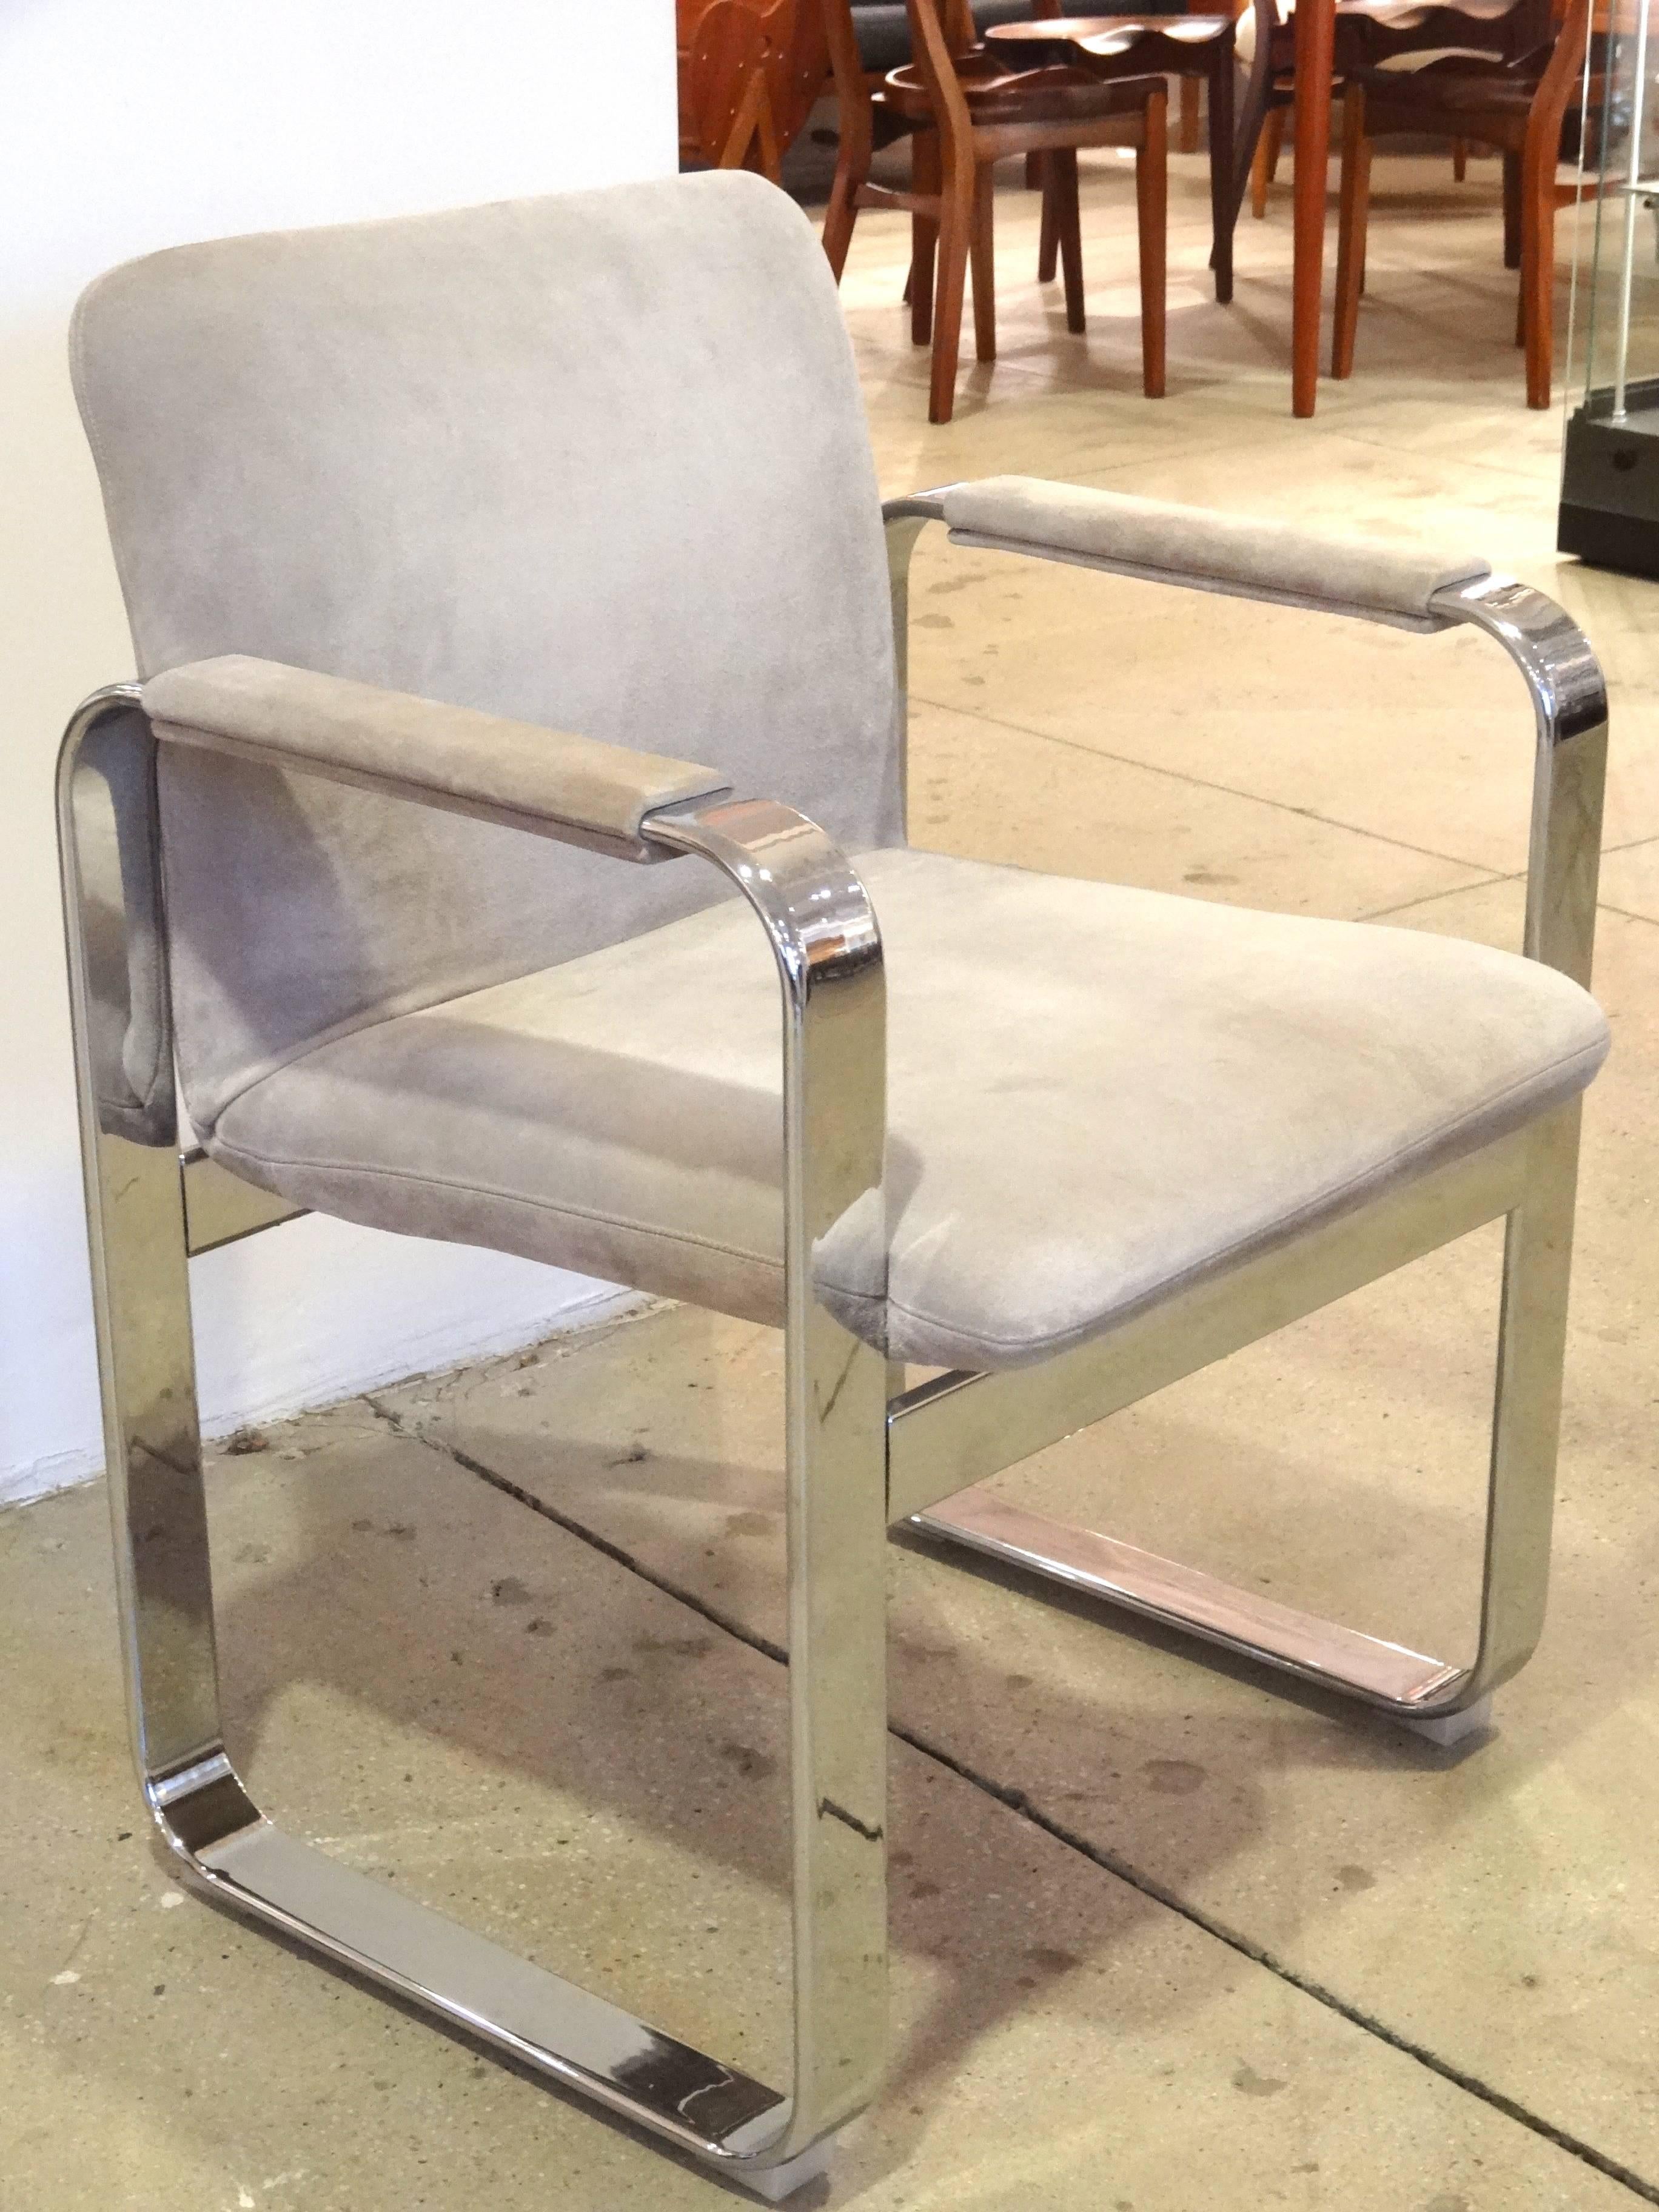 A pair of beautifully designed armchairs.
Clean modern lines highlighted by the nickel finished and neutral tone upholstery.
Italy stamp on underside.
Measures: Arm height is approximate 26